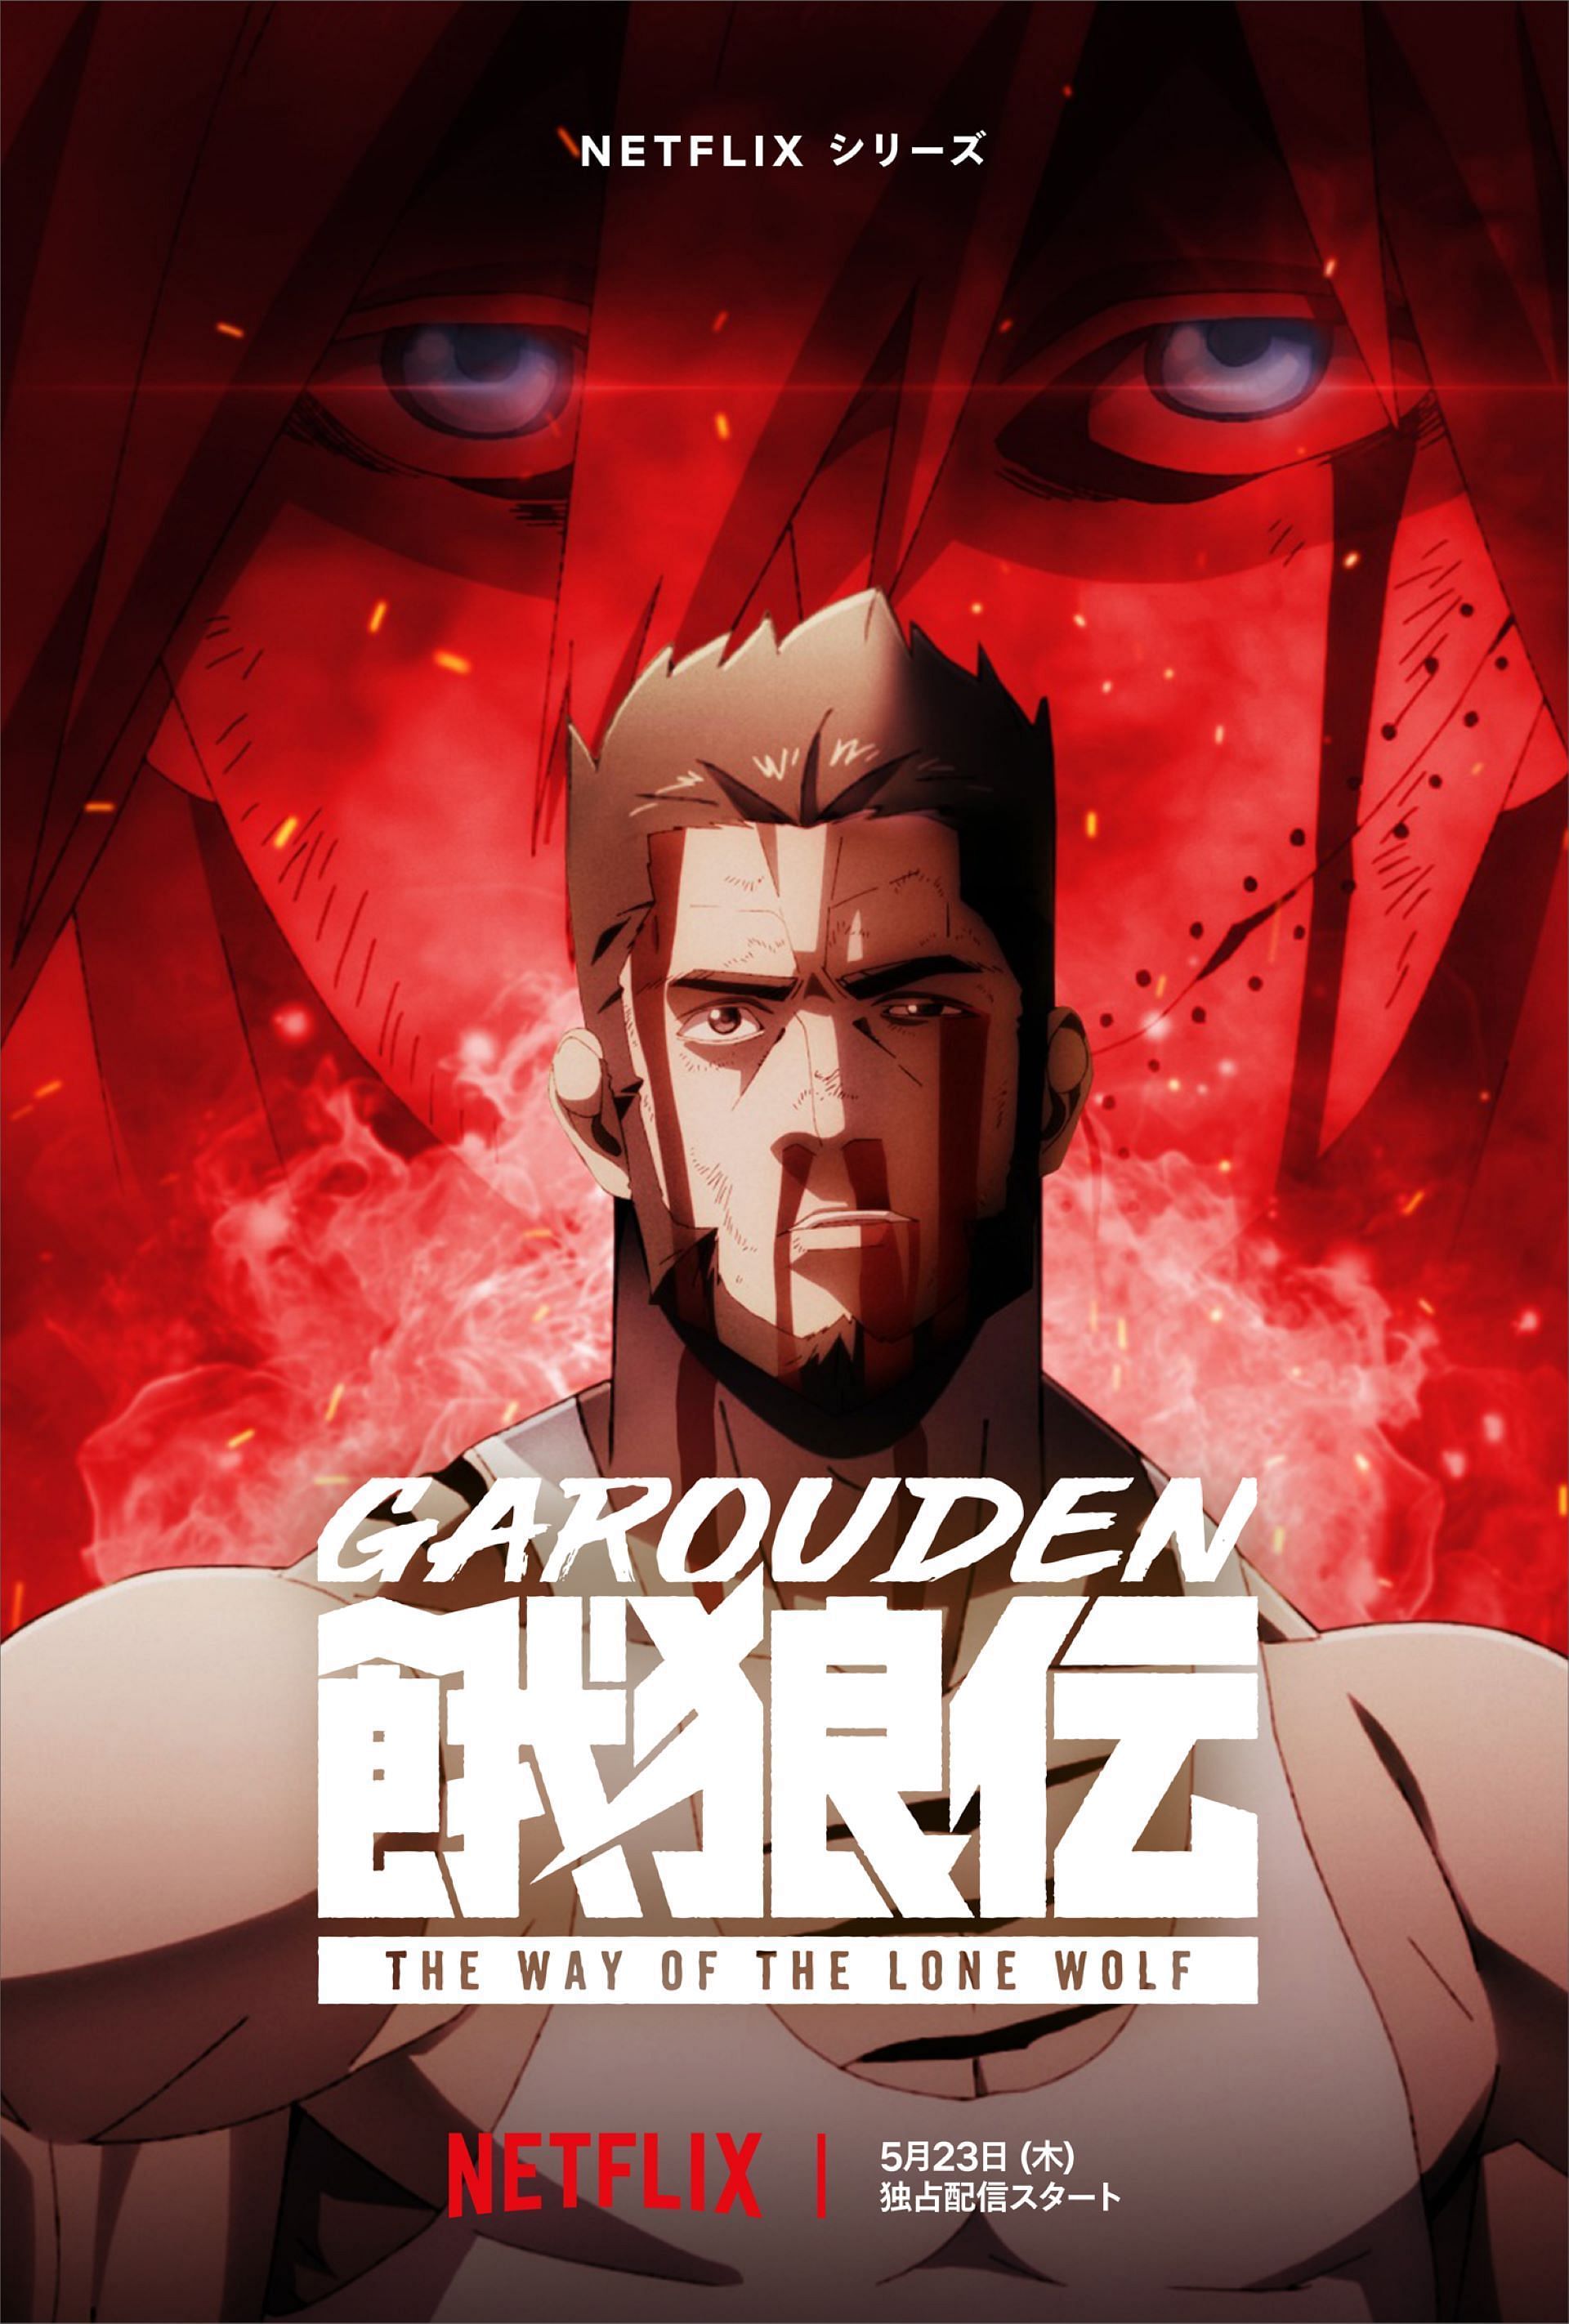 The key visual for Garoden: The Way of the Lone Wolf (Image via Netflix)